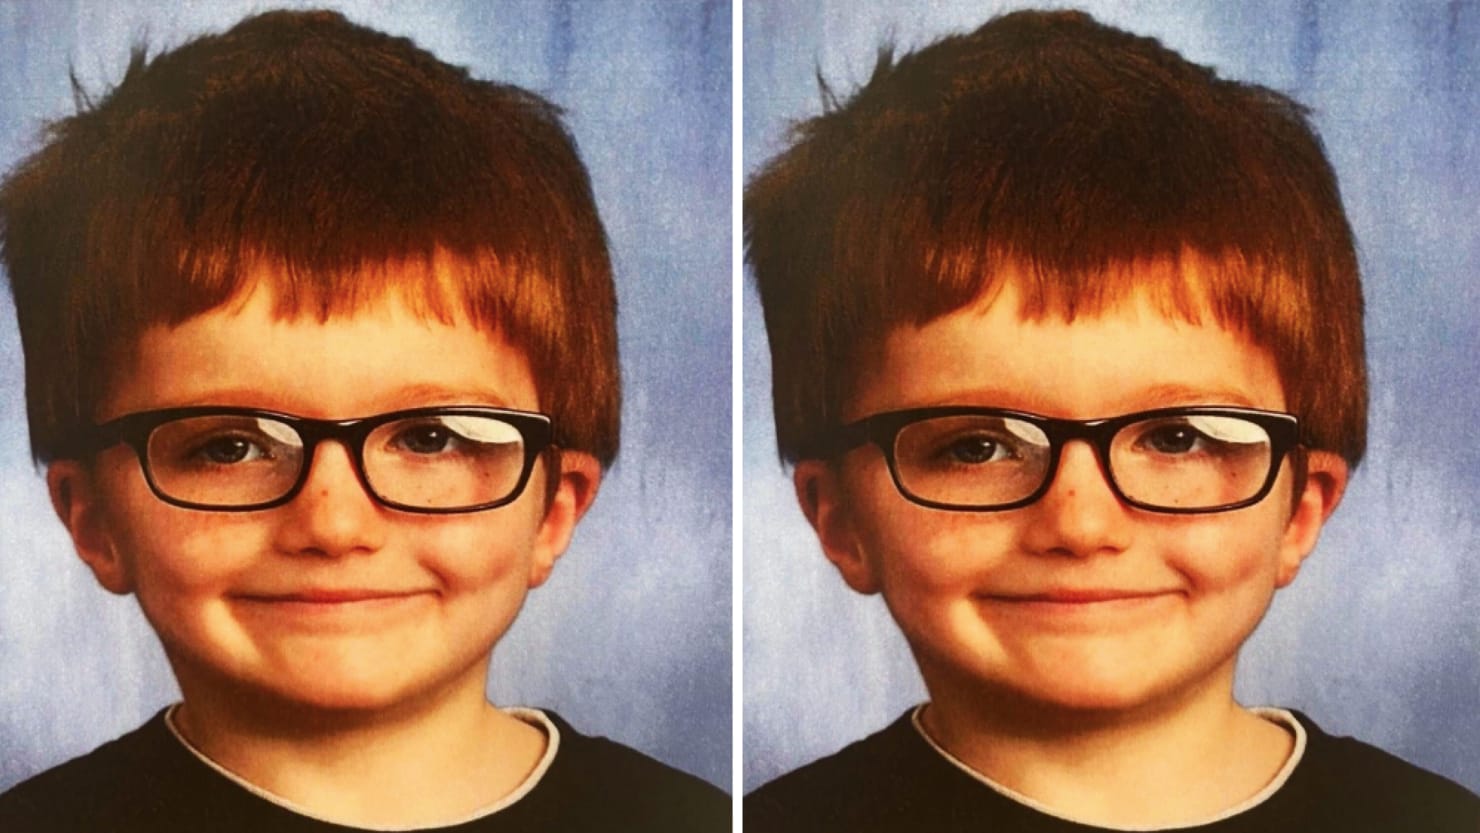 James Gosney, 6, in Ohio, died after clinging to the car when his mother Britney Gosney abandoned him, police say